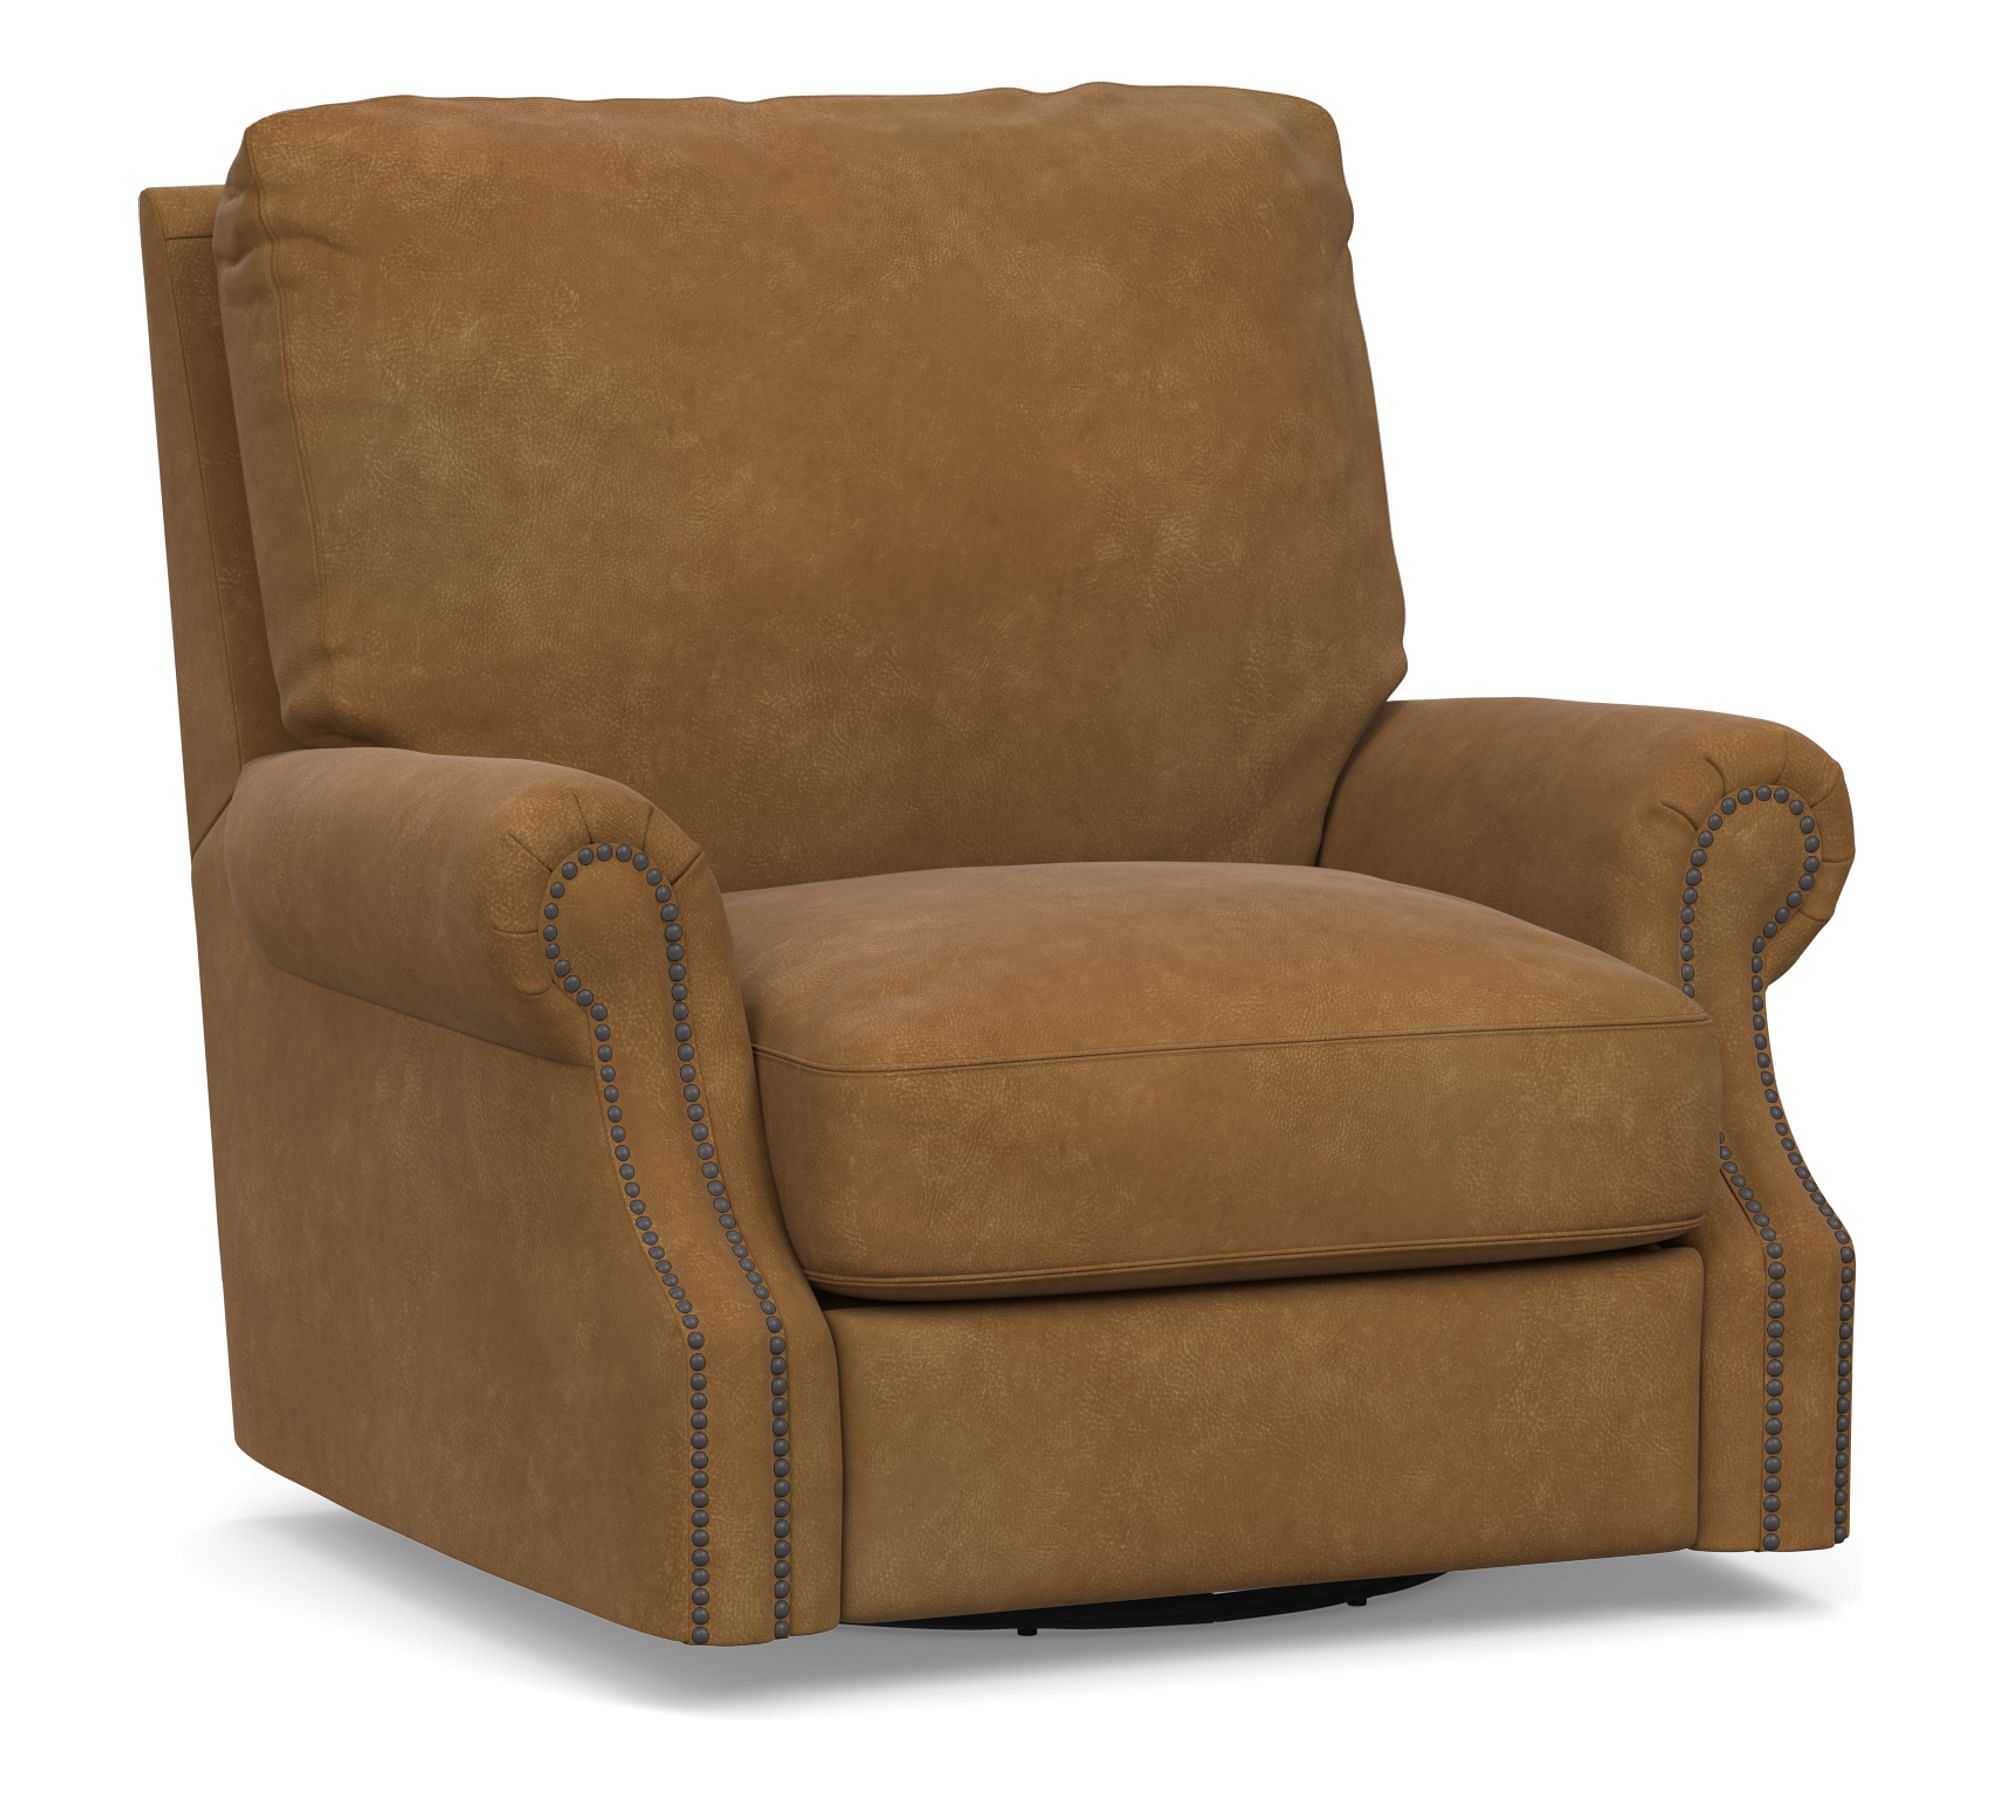 James Roll Arm Leather Swivel Chair